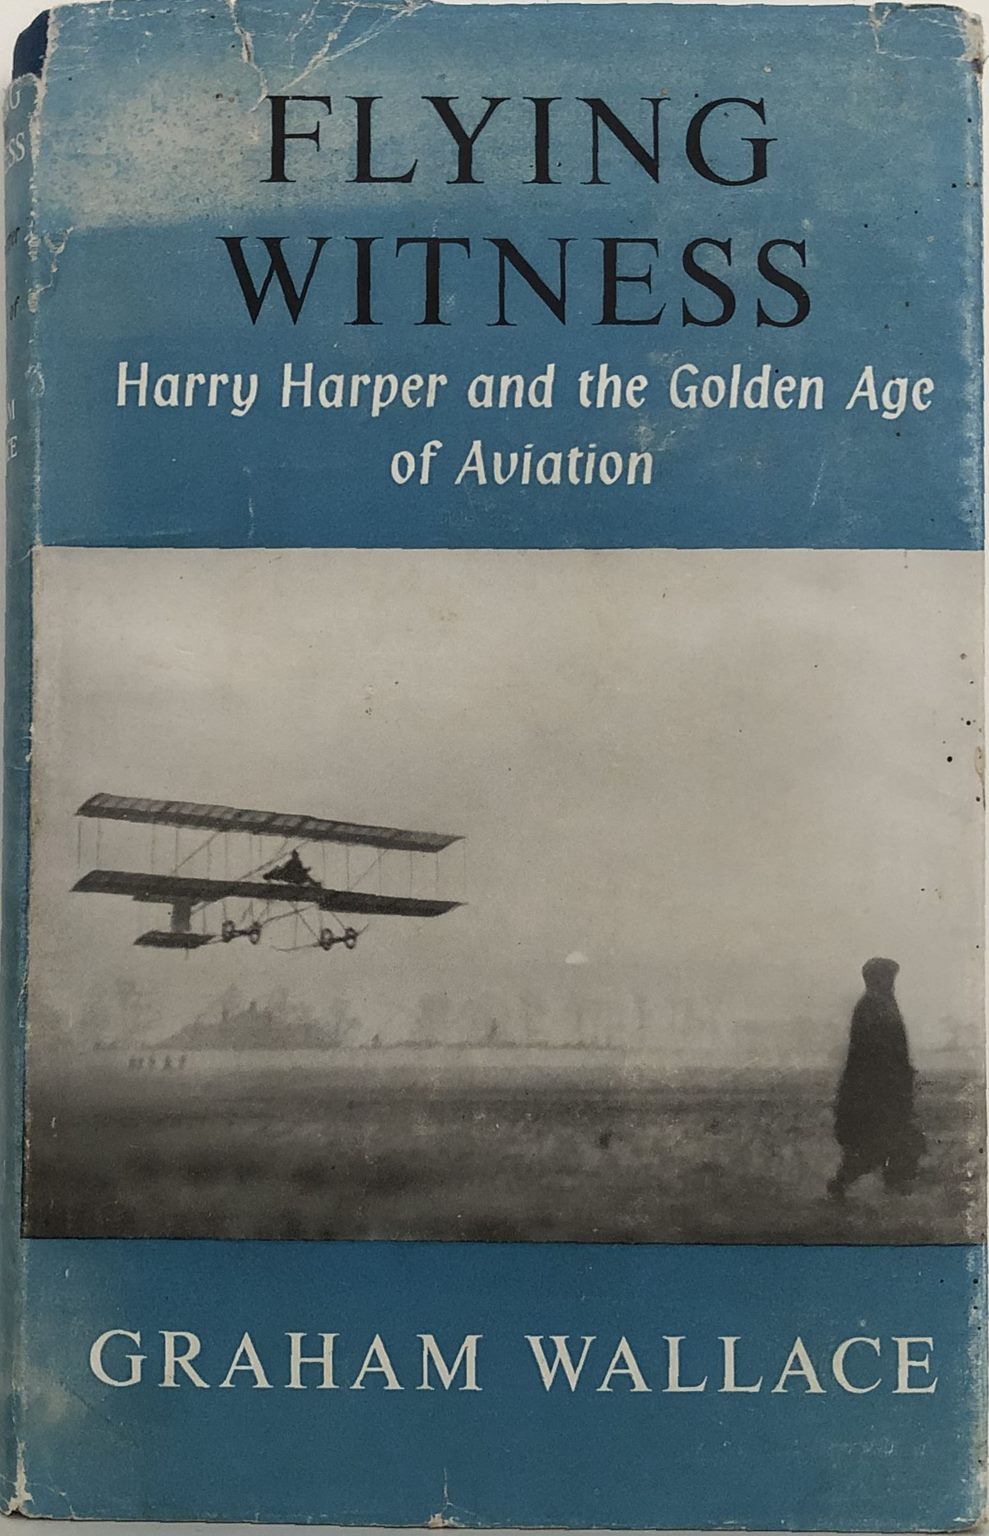 FLYING WITNESS: Harry Harper and the Golden Age of Aviation